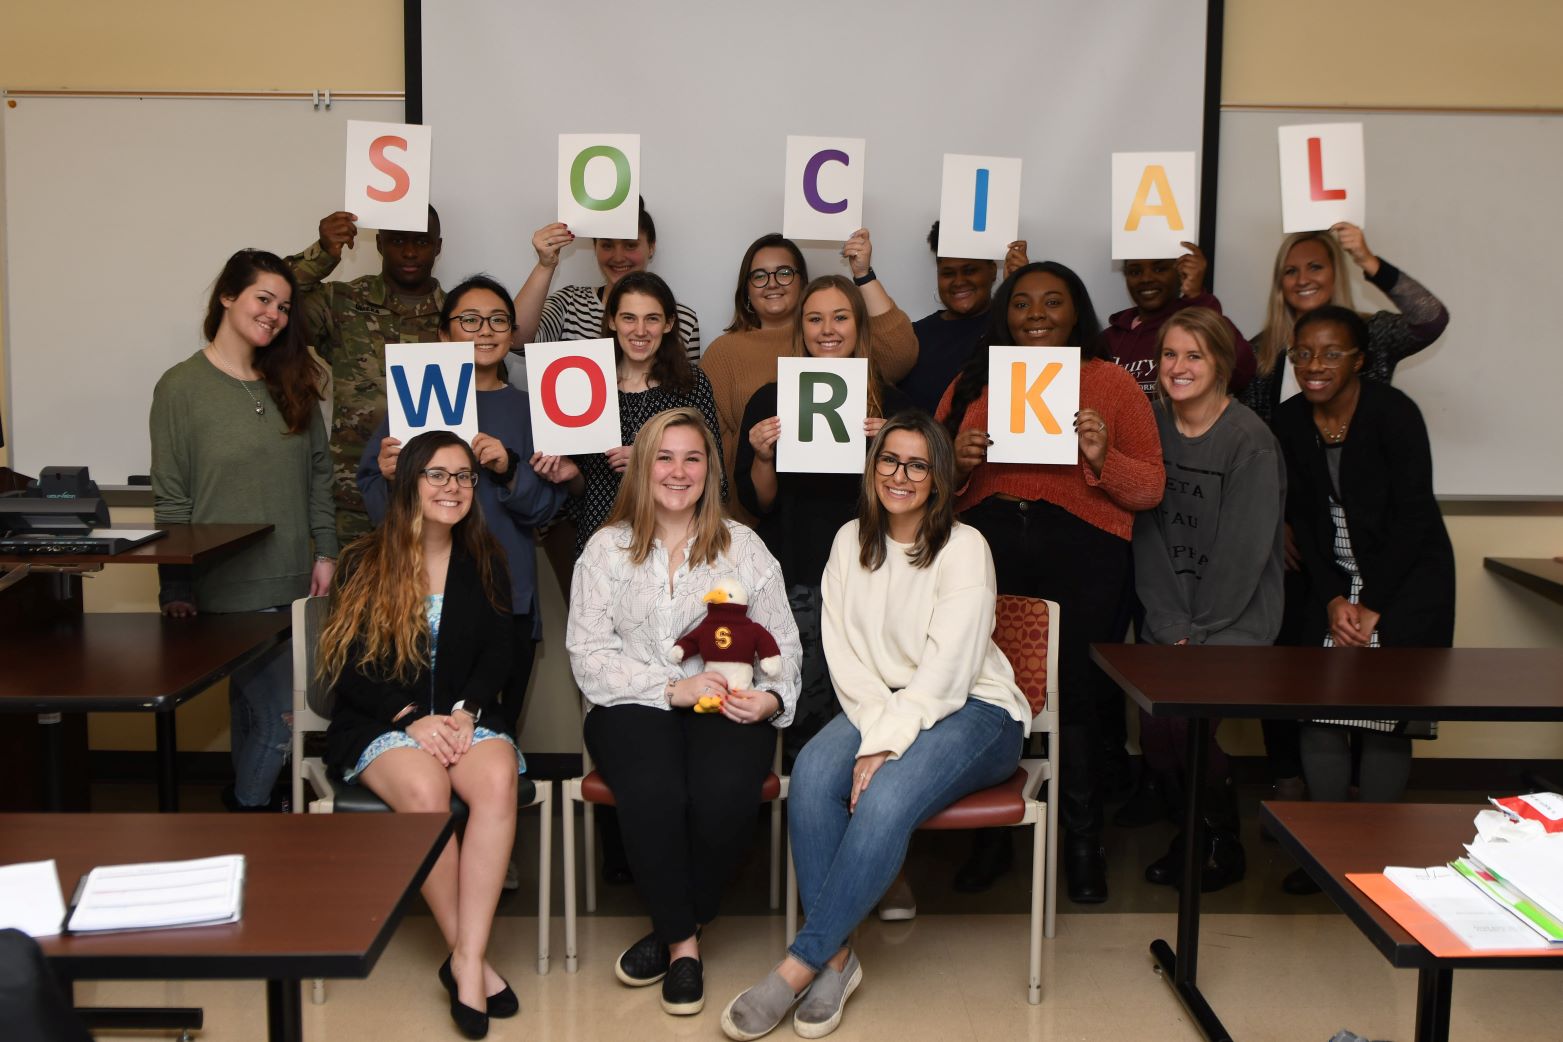 Social work students